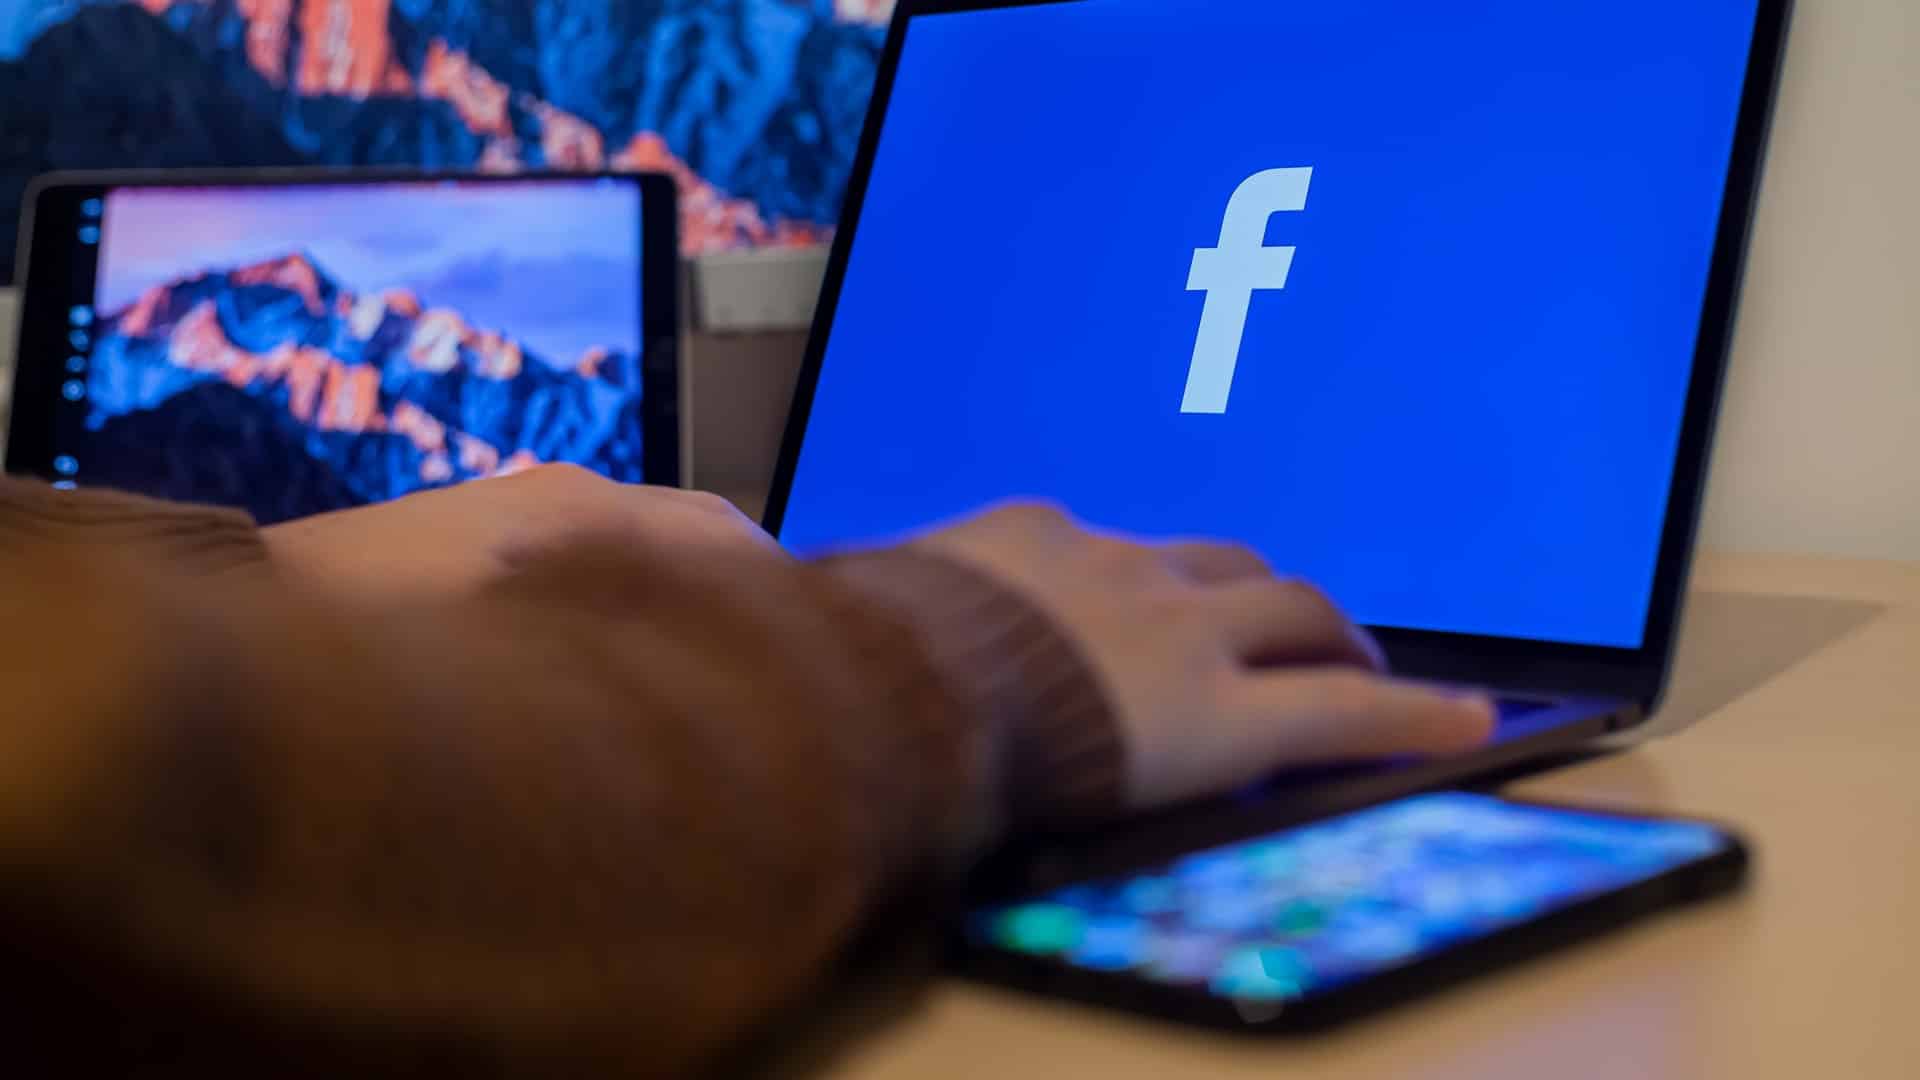 Whistleblower accuses Facebook of prioritizing own profits over public safety